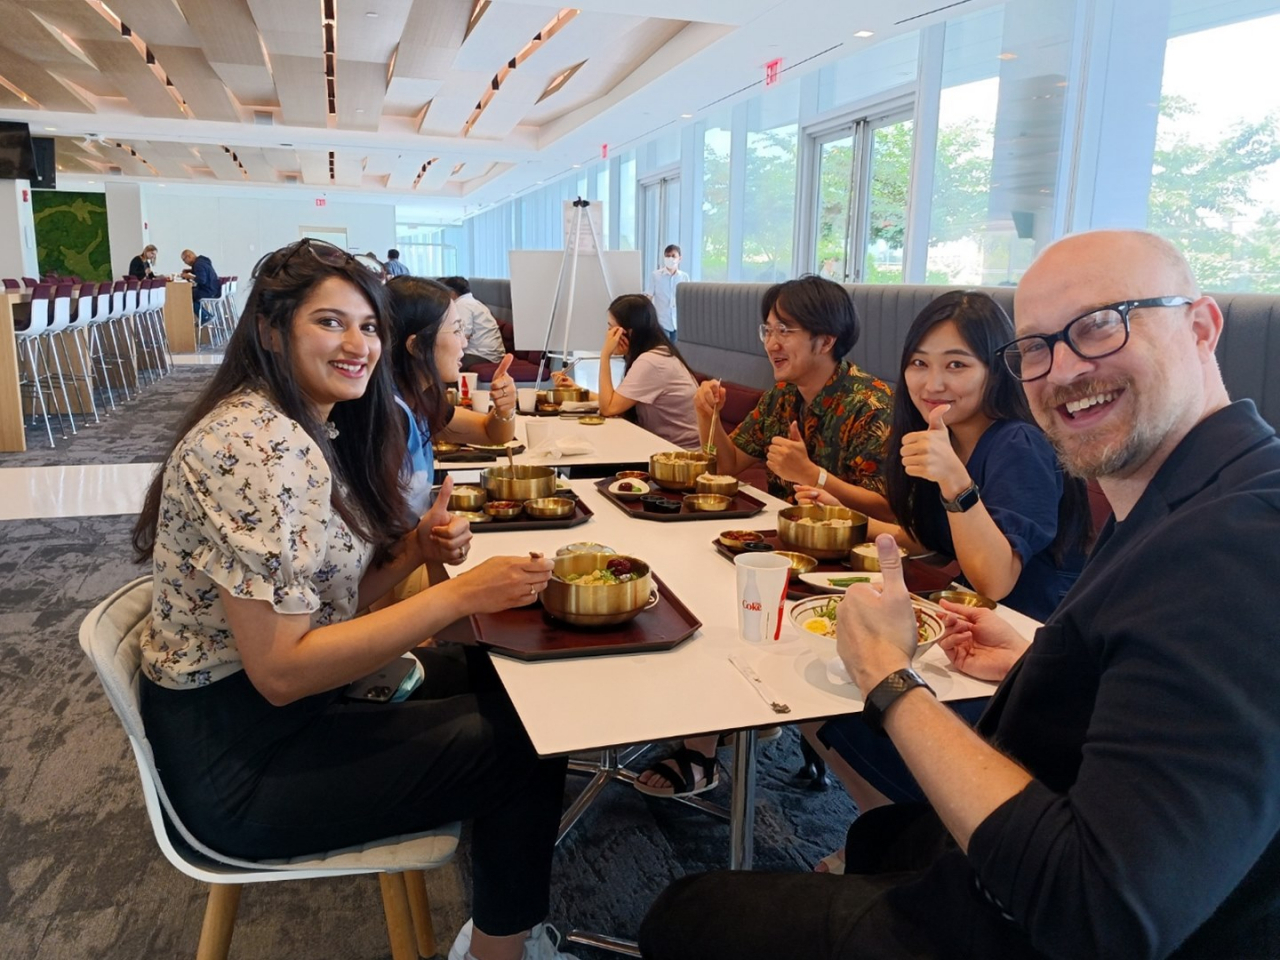 Workers at LG Electronics’ North American headquarters in New Jersey dine at a cafeteria whose menus are provided by Ourhome. (Ourhome)